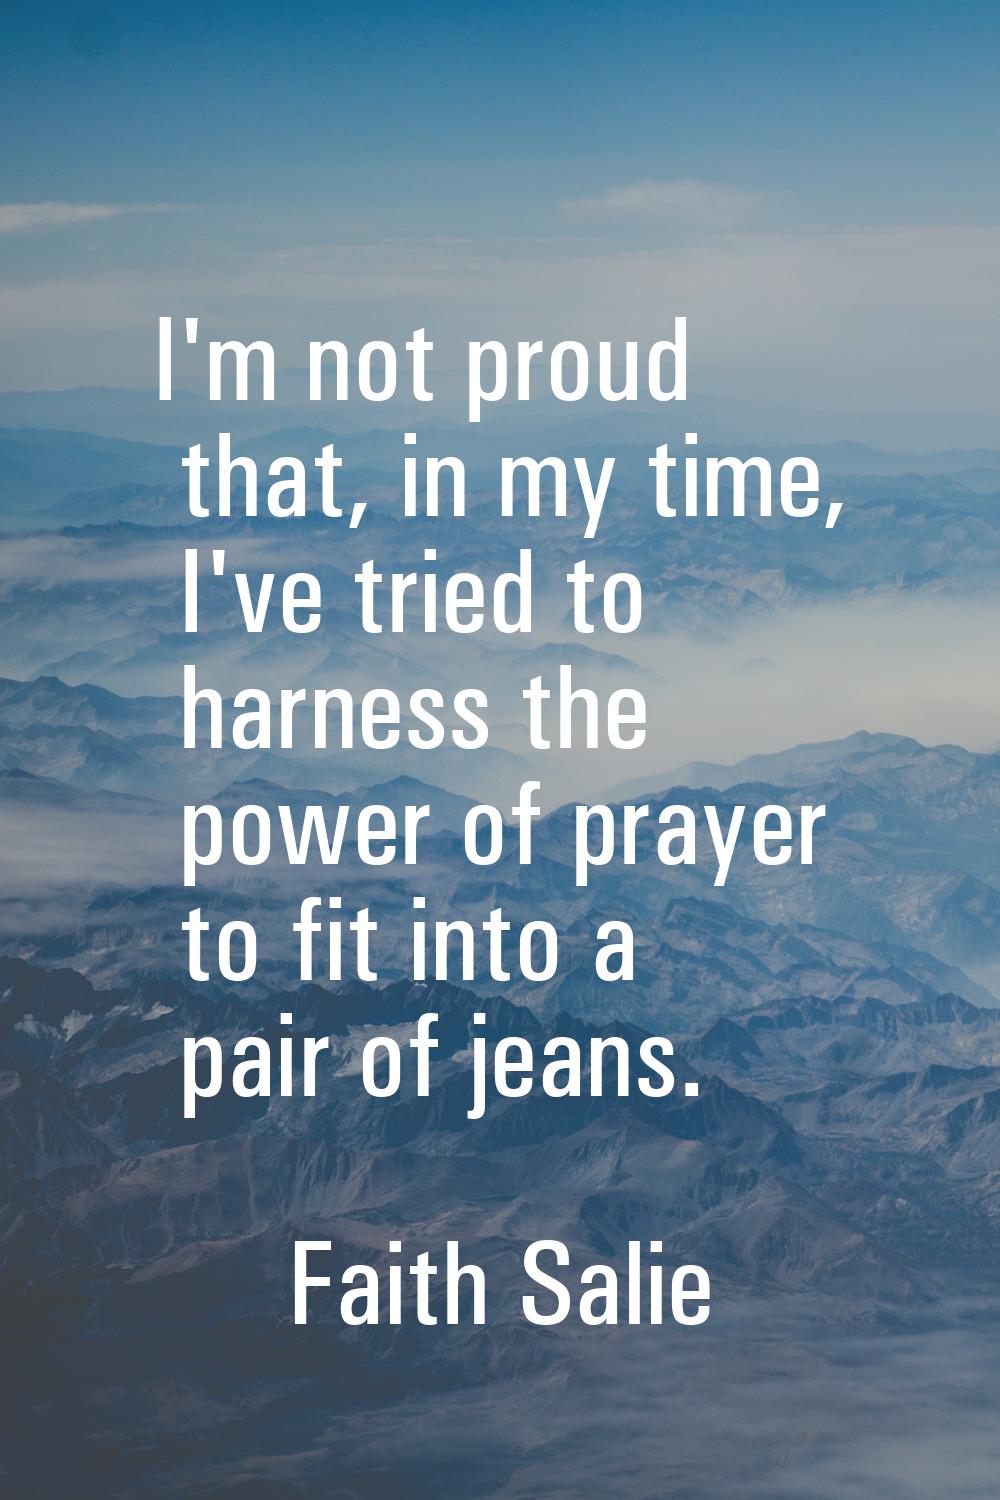 I'm not proud that, in my time, I've tried to harness the power of prayer to fit into a pair of jea